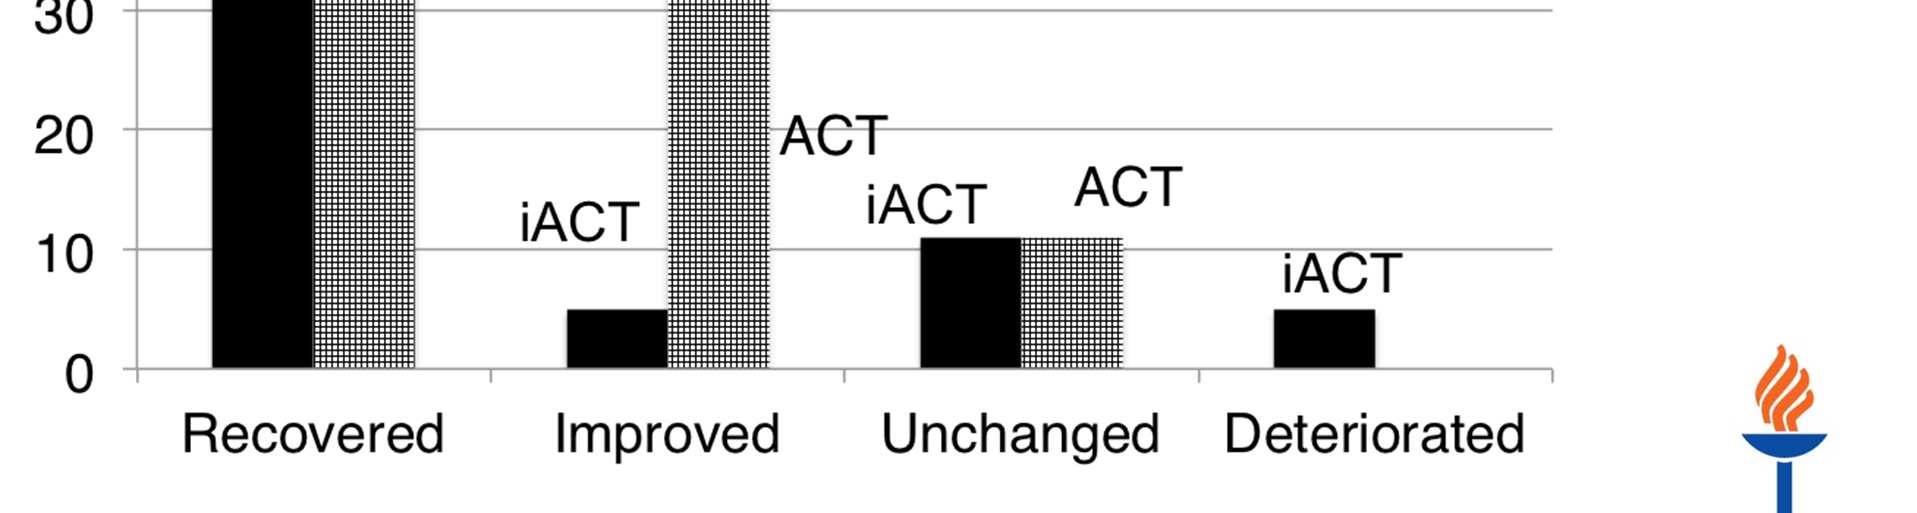 Recovered and Improved (iact n= 15, ACT n = 16 not